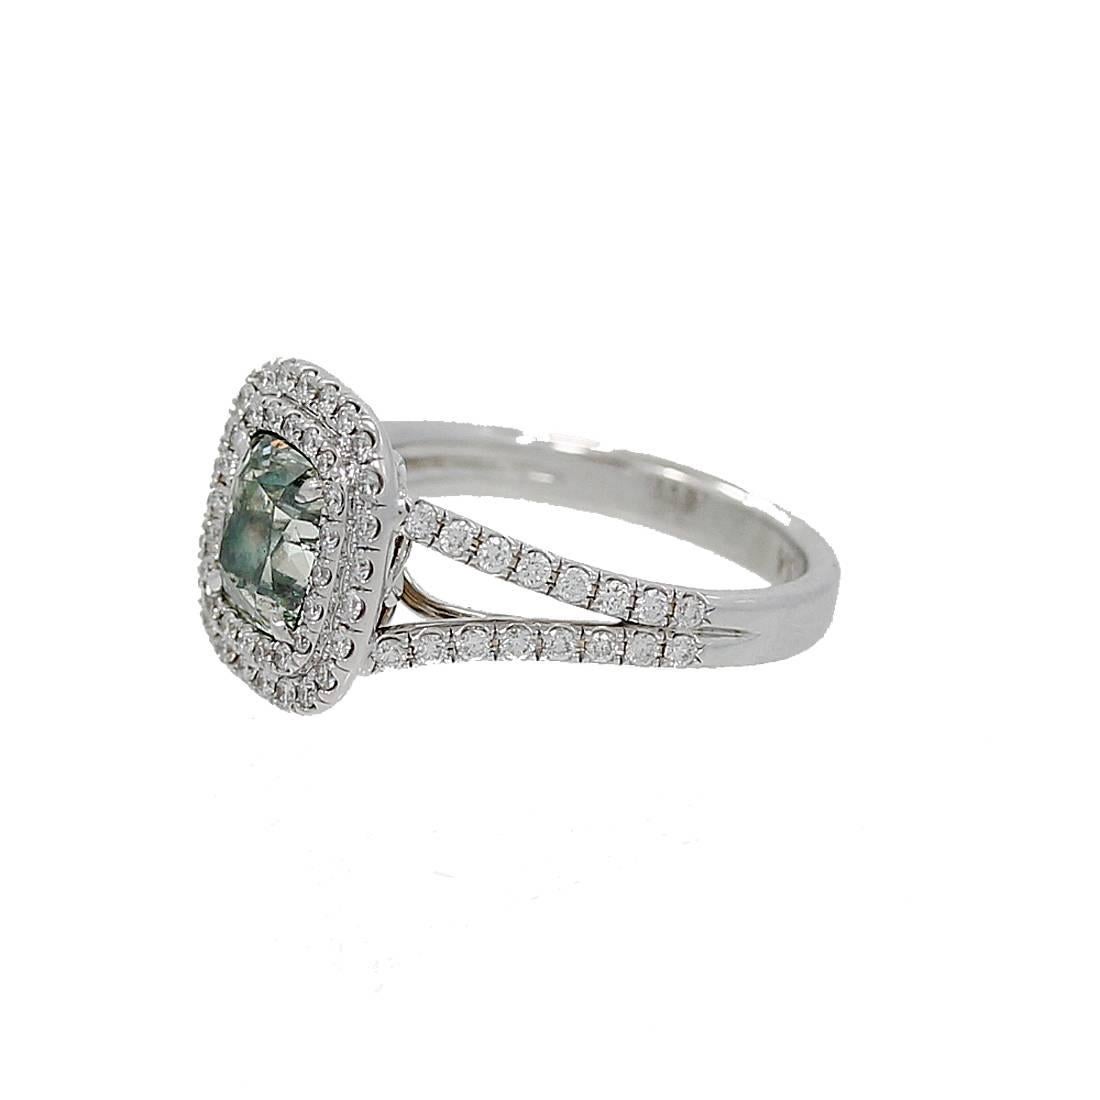 18K White Gold Engagement Ring with a Natural Fancy Cushion Cut Diamond. This rare stone is Grayish, Yellowish, Green and weighs 2.05 carats. It is I1 in clarity and has a GIA report #115730070. A beautiful and rare find. The ring is a size 6.5 but